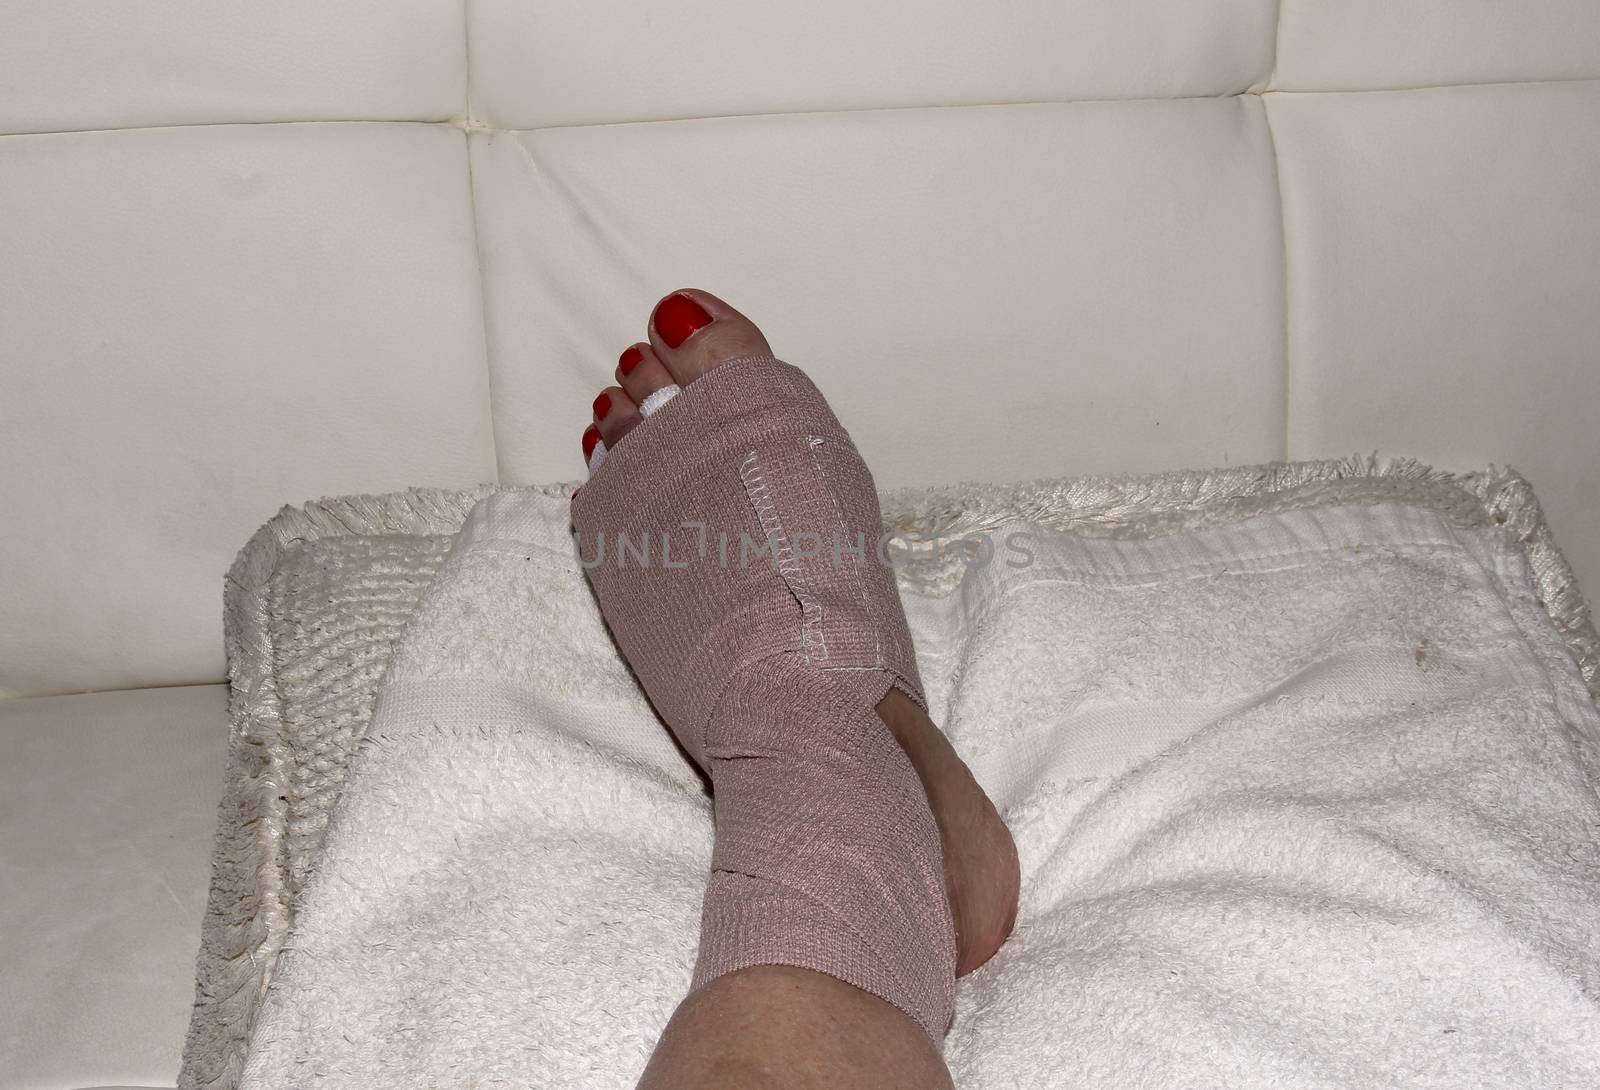 Foot after Morton’s neuroma surgery between the second and third toe.  After surgery, the bruised foot is wrapped and then placed in a protective boot.